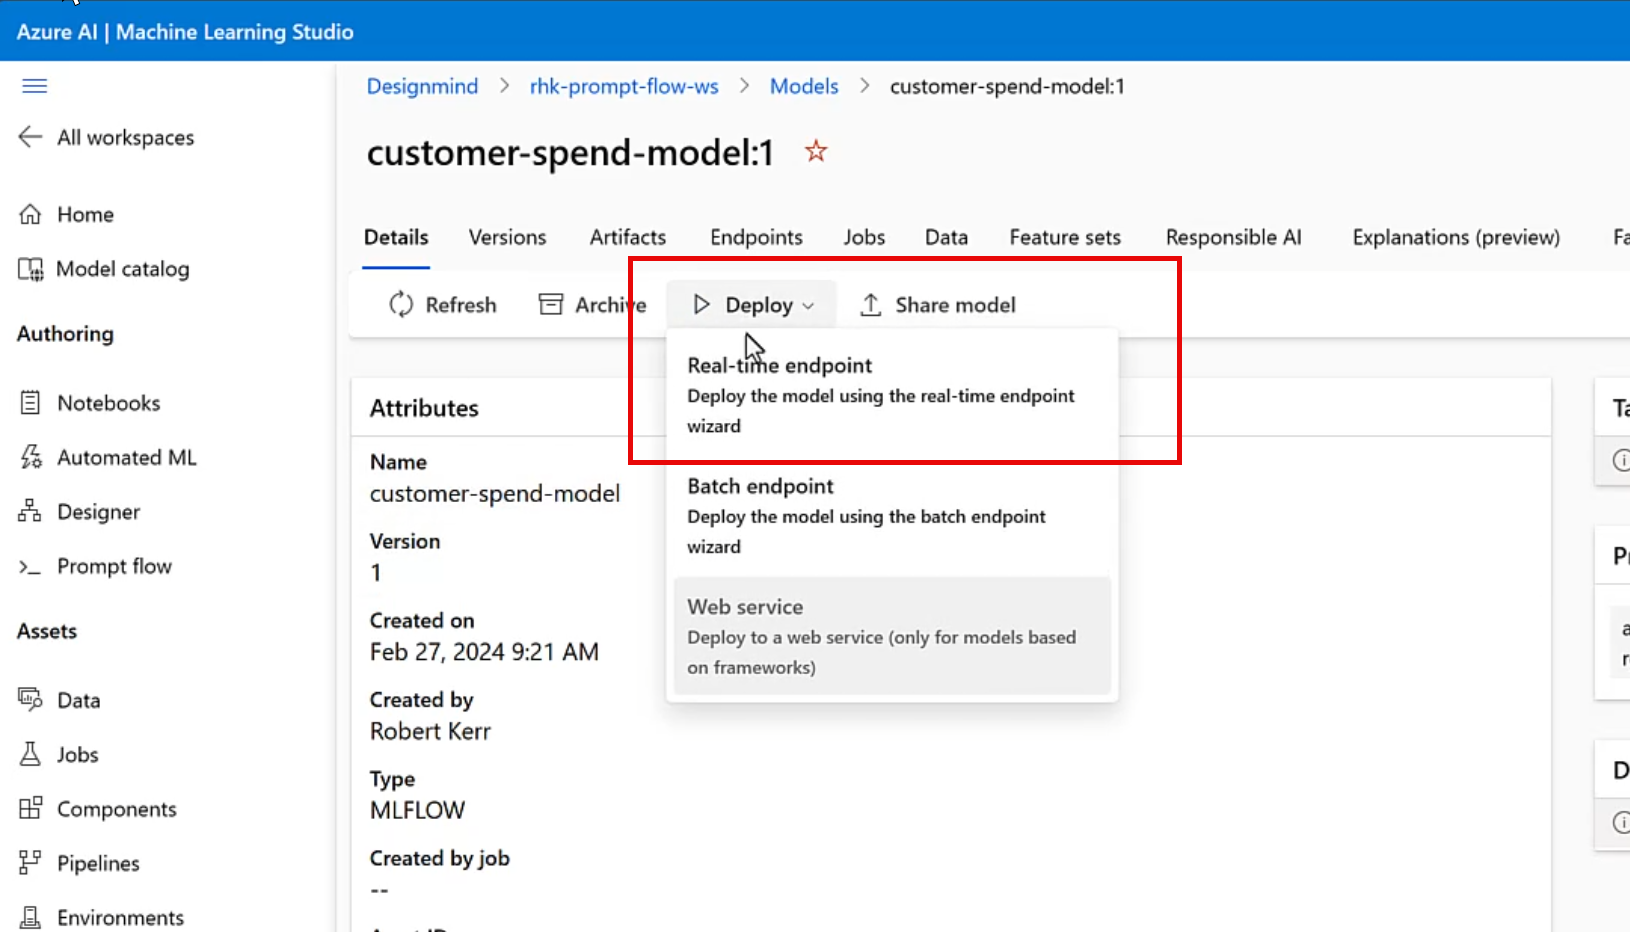 Unleash Your Model's Potential: Step-by-Step Guide to Deploying a Fabric Machine Learning Model on an Azure ML Inference Endpoint